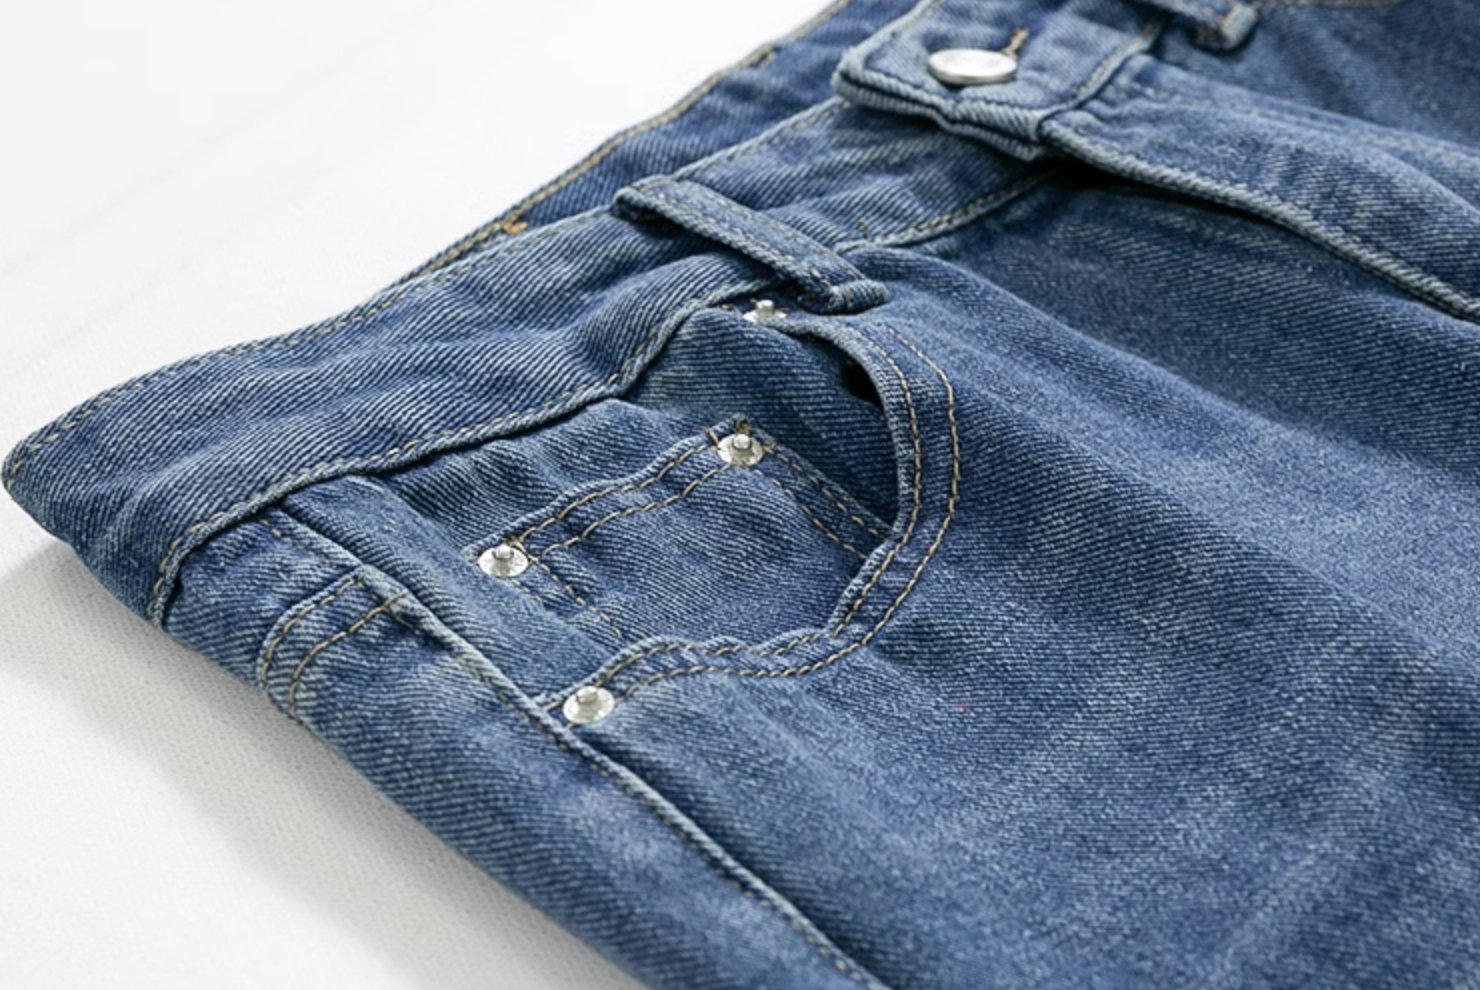 HIGH ANKLE JEANS - Stockbay